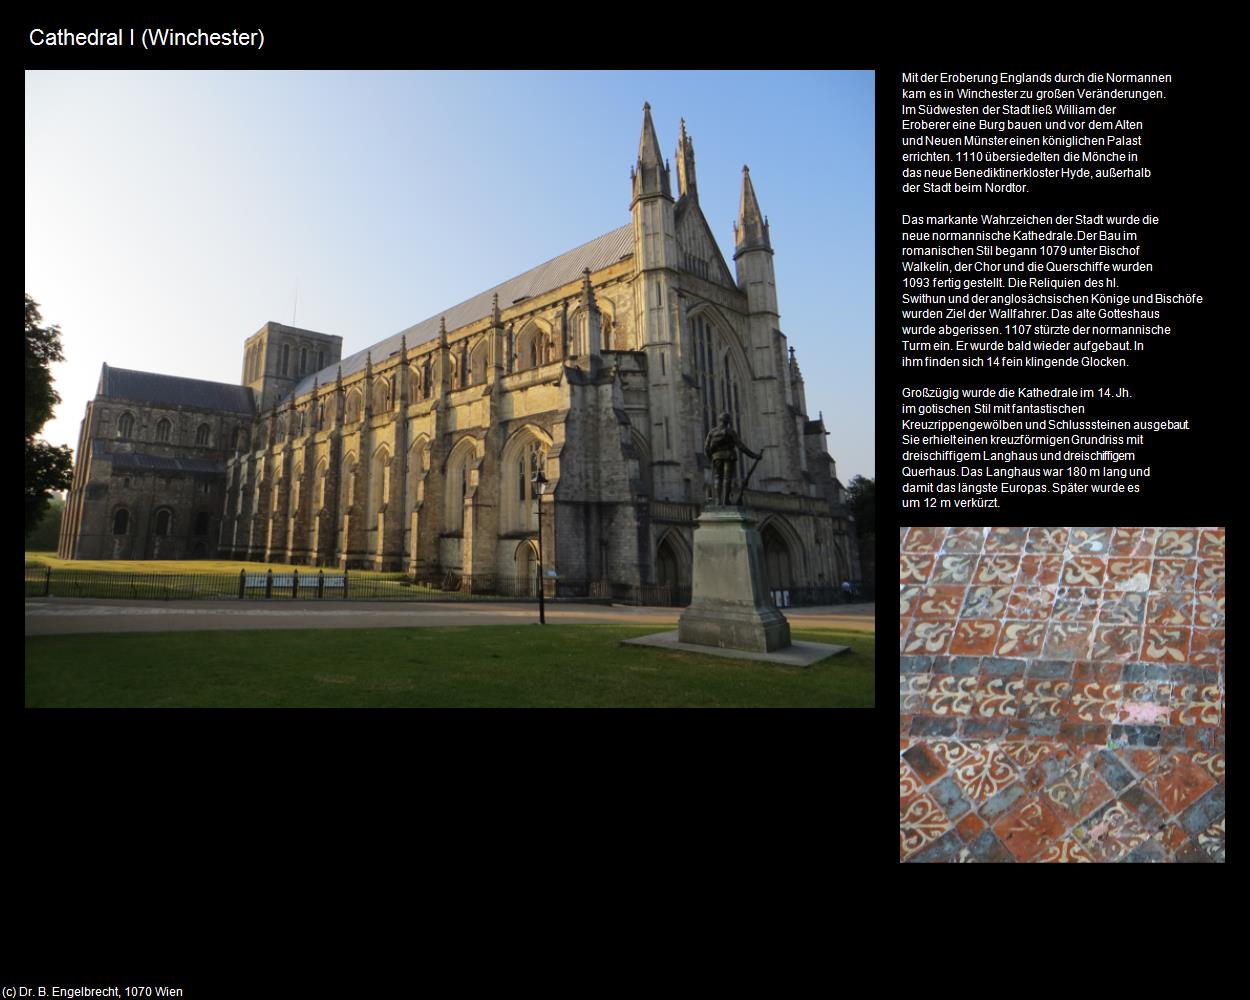 Cathedral I (Winchester, England) in Kulturatlas-ENGLAND und WALES